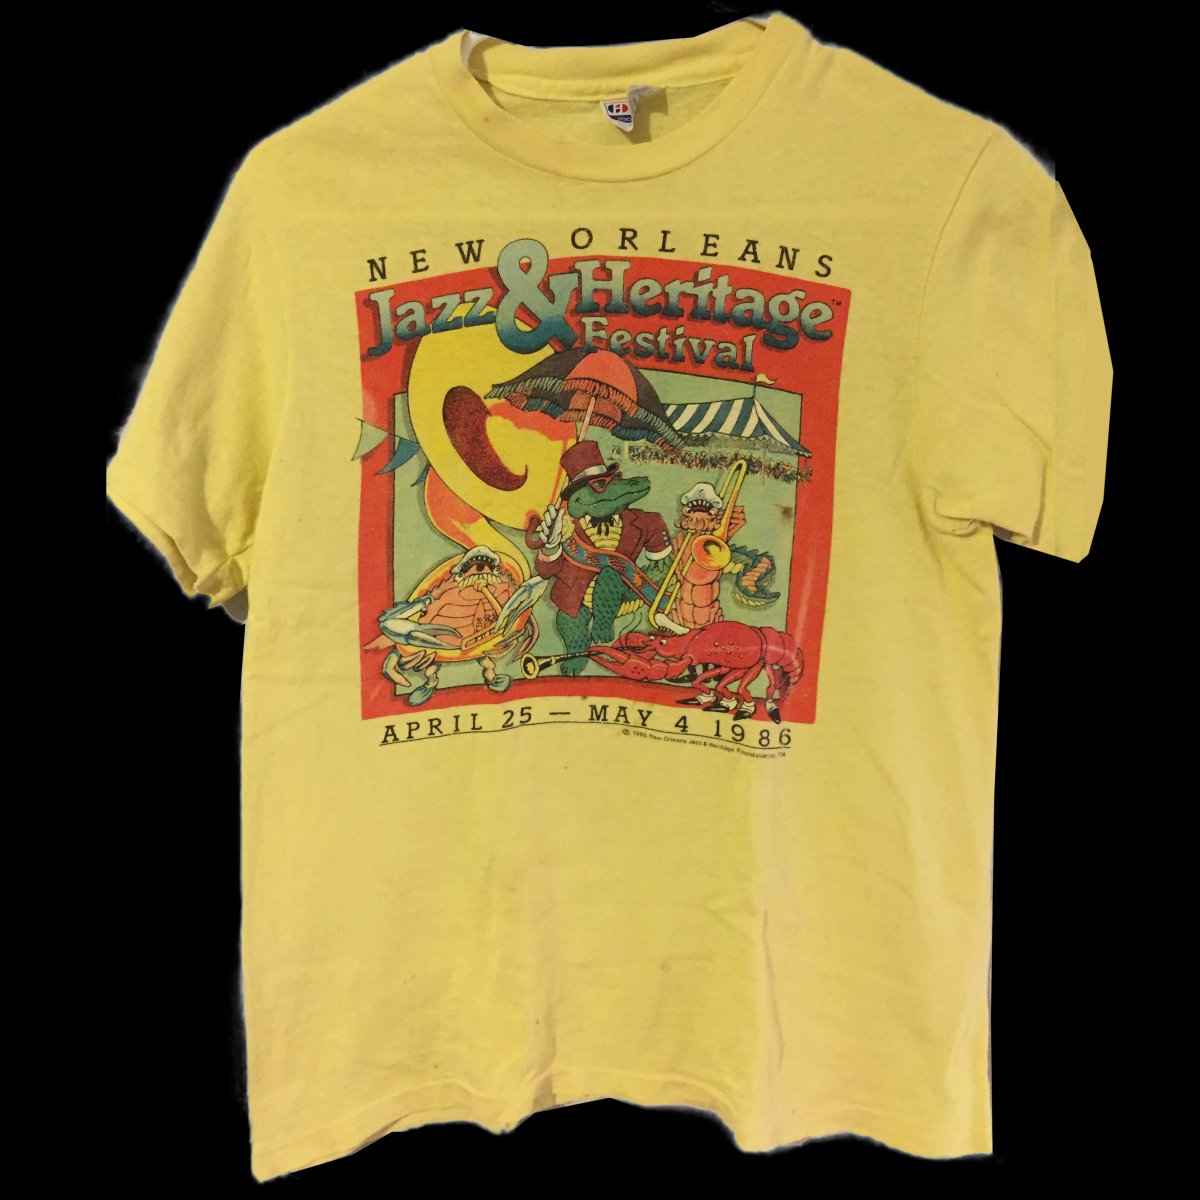 1986 New Orleans Jazz and Heritage Festival T-Shirt